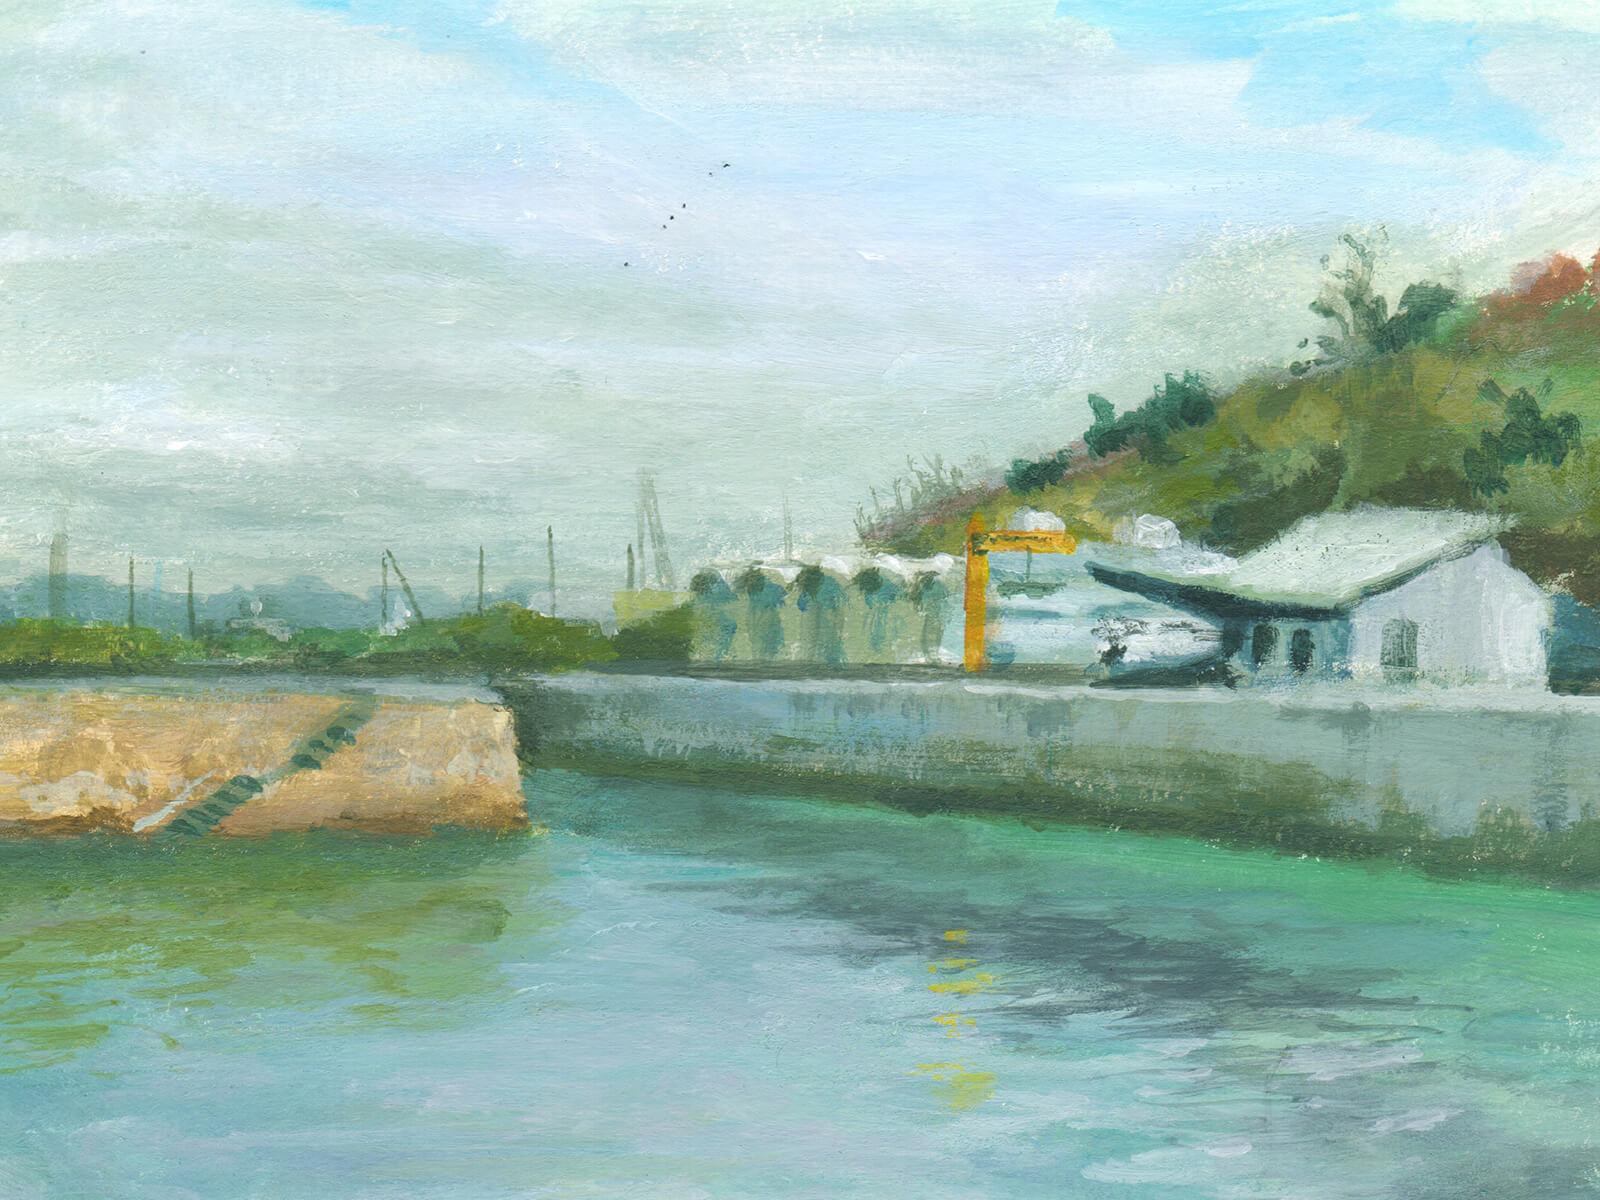 A canal with a stone dock and boat support facilities seen against white clouds above and a light aqua-colored water below.